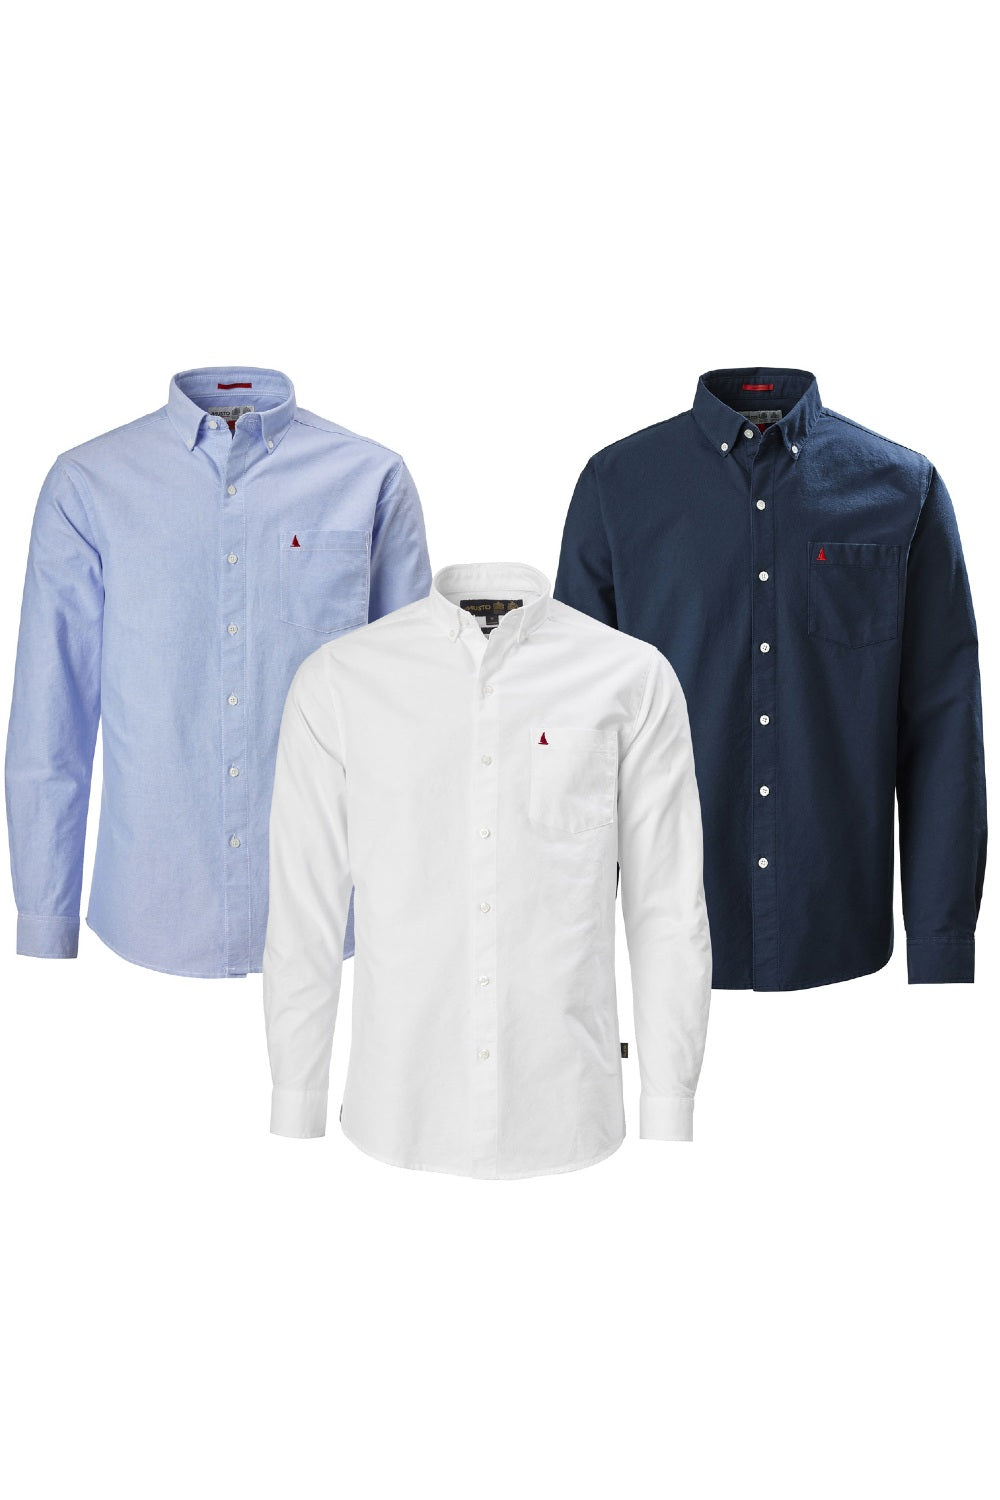 Musto Aiden Long Sleeve Oxford Shirt in Pale Blue, White and Navy